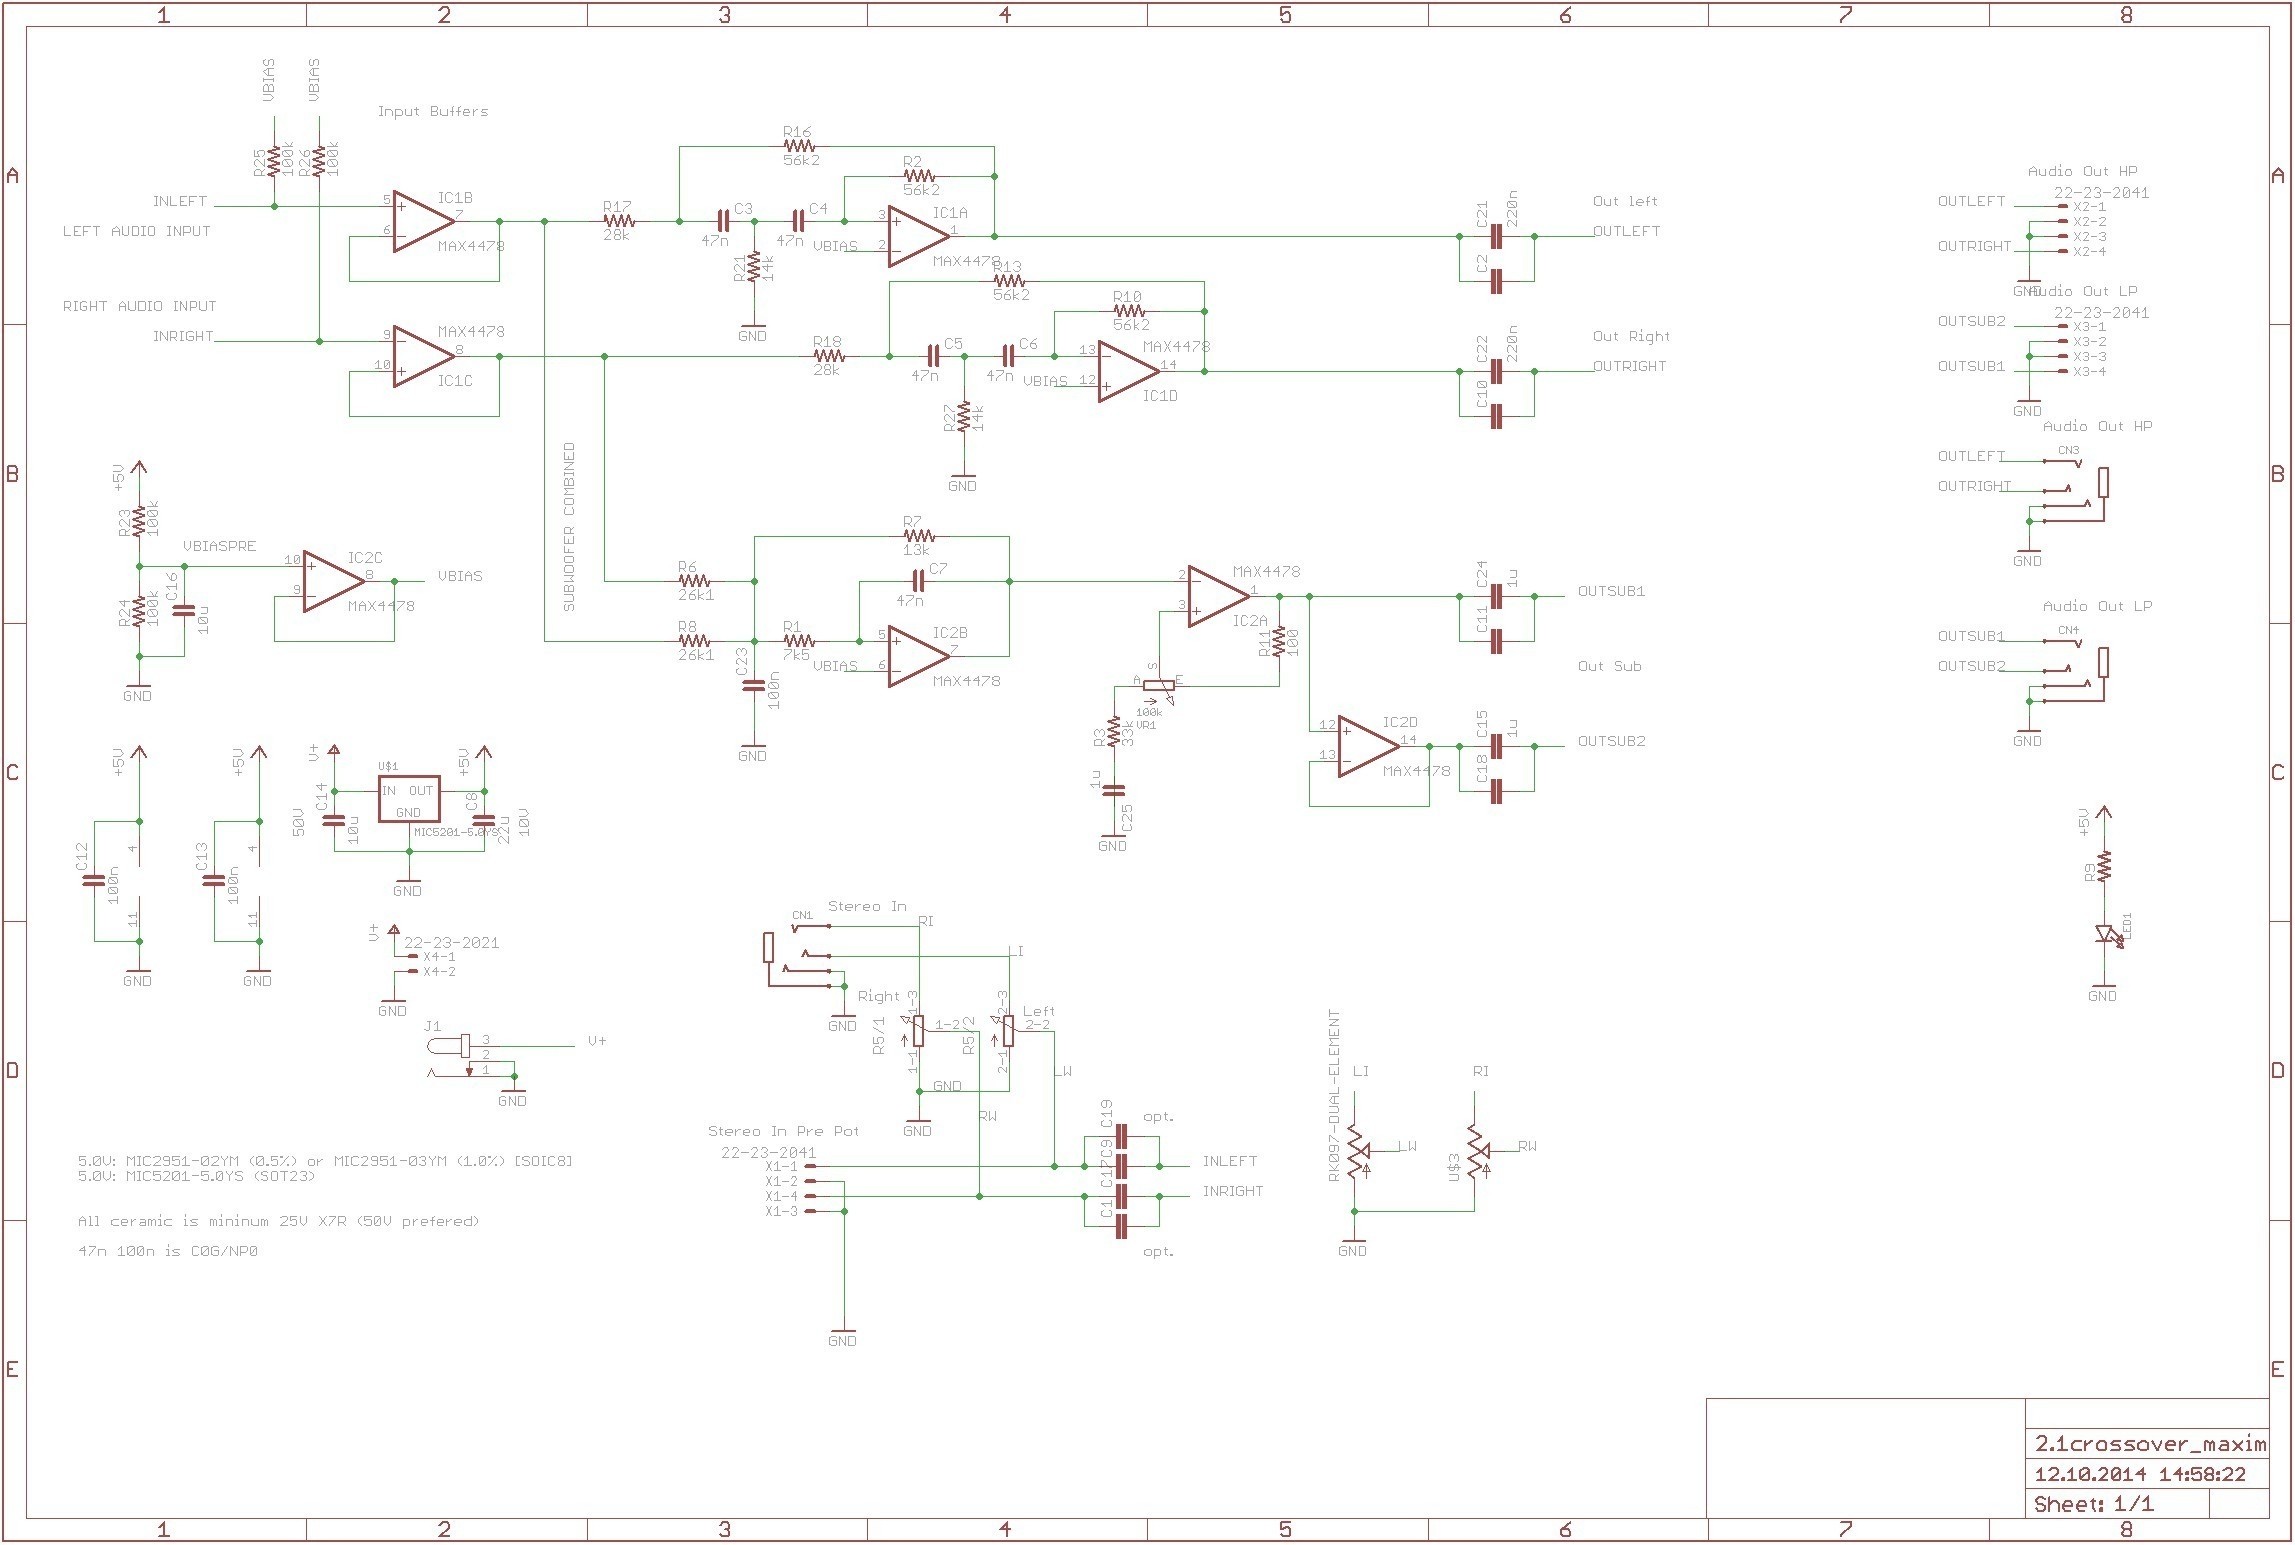 Wiring Diagram for Two Light Fixtures Refrence 2 Lights 2 Switches 2 Lights 2 Switches